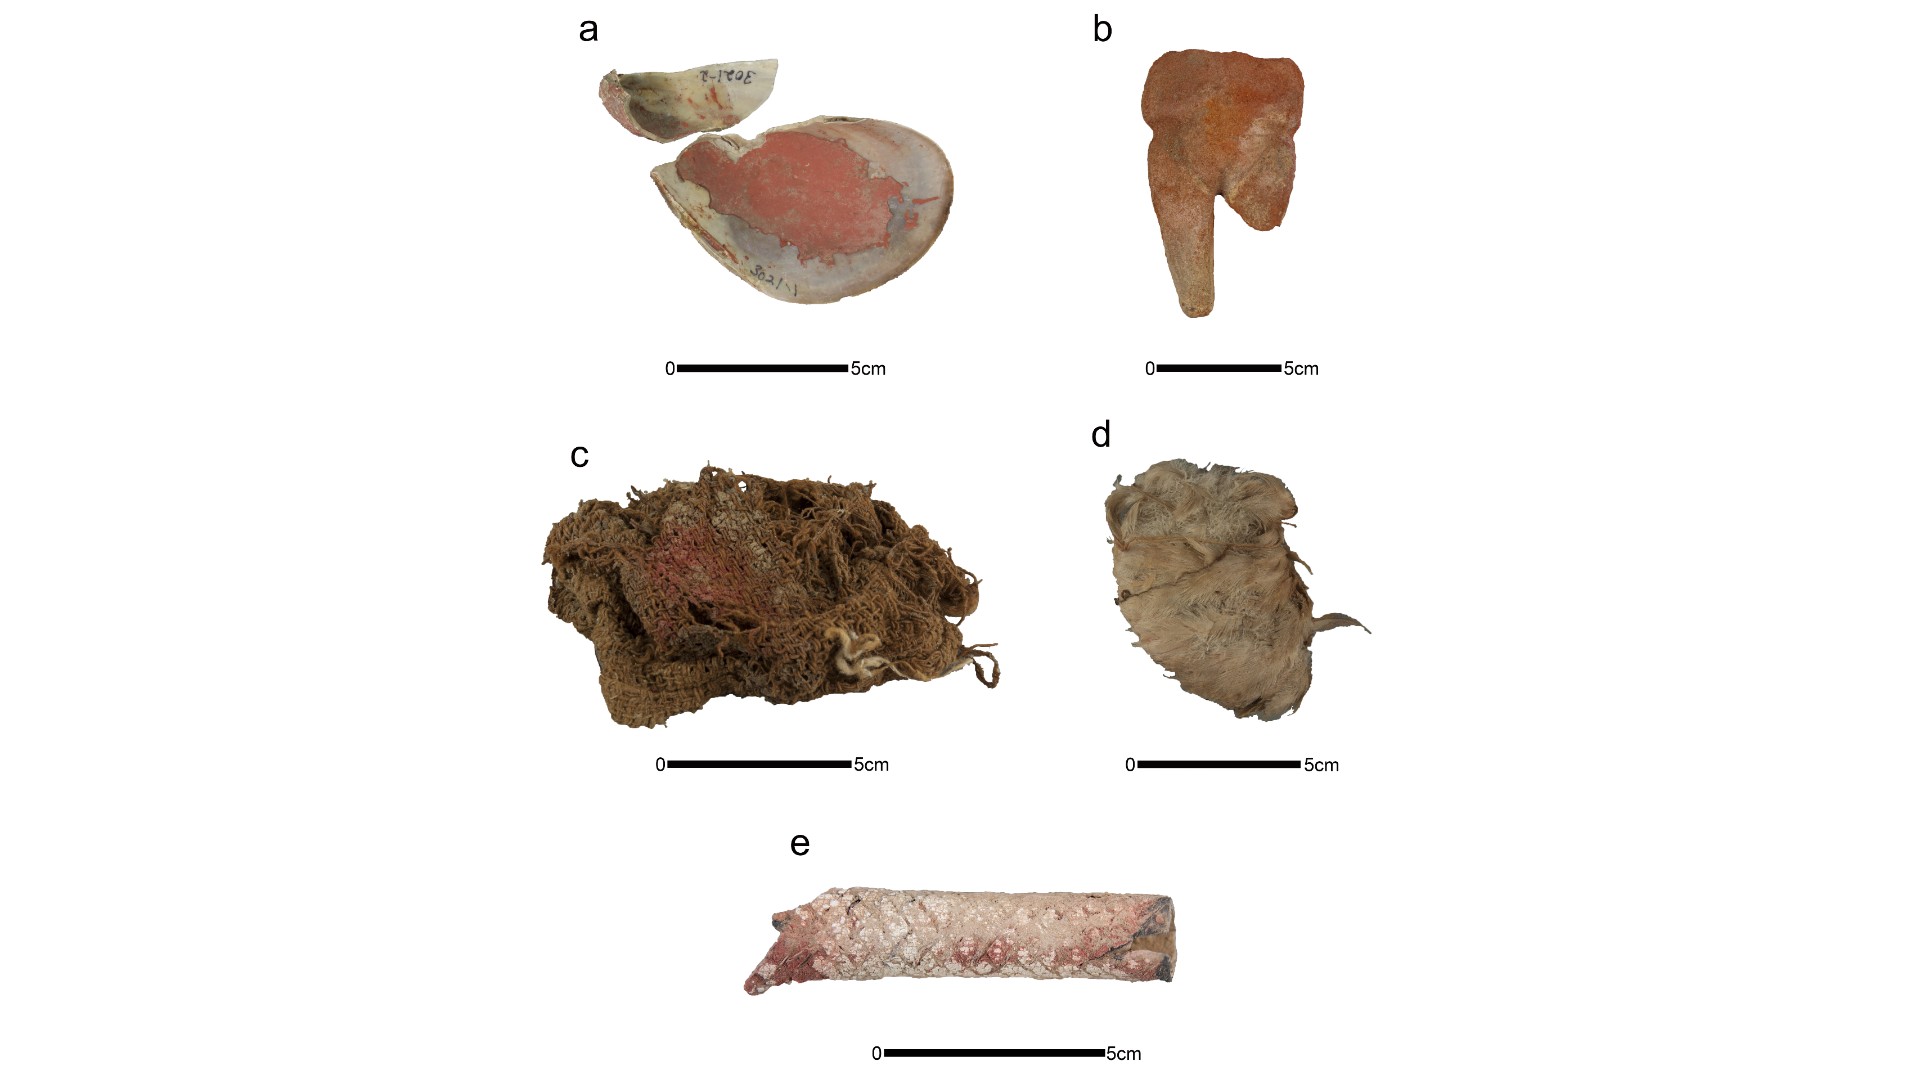 Material and skeletal remains with red pigment: a) shell container, b) ceramic figurine, c) textile, d) modified bird, e) worked bone wrapped in yarn.